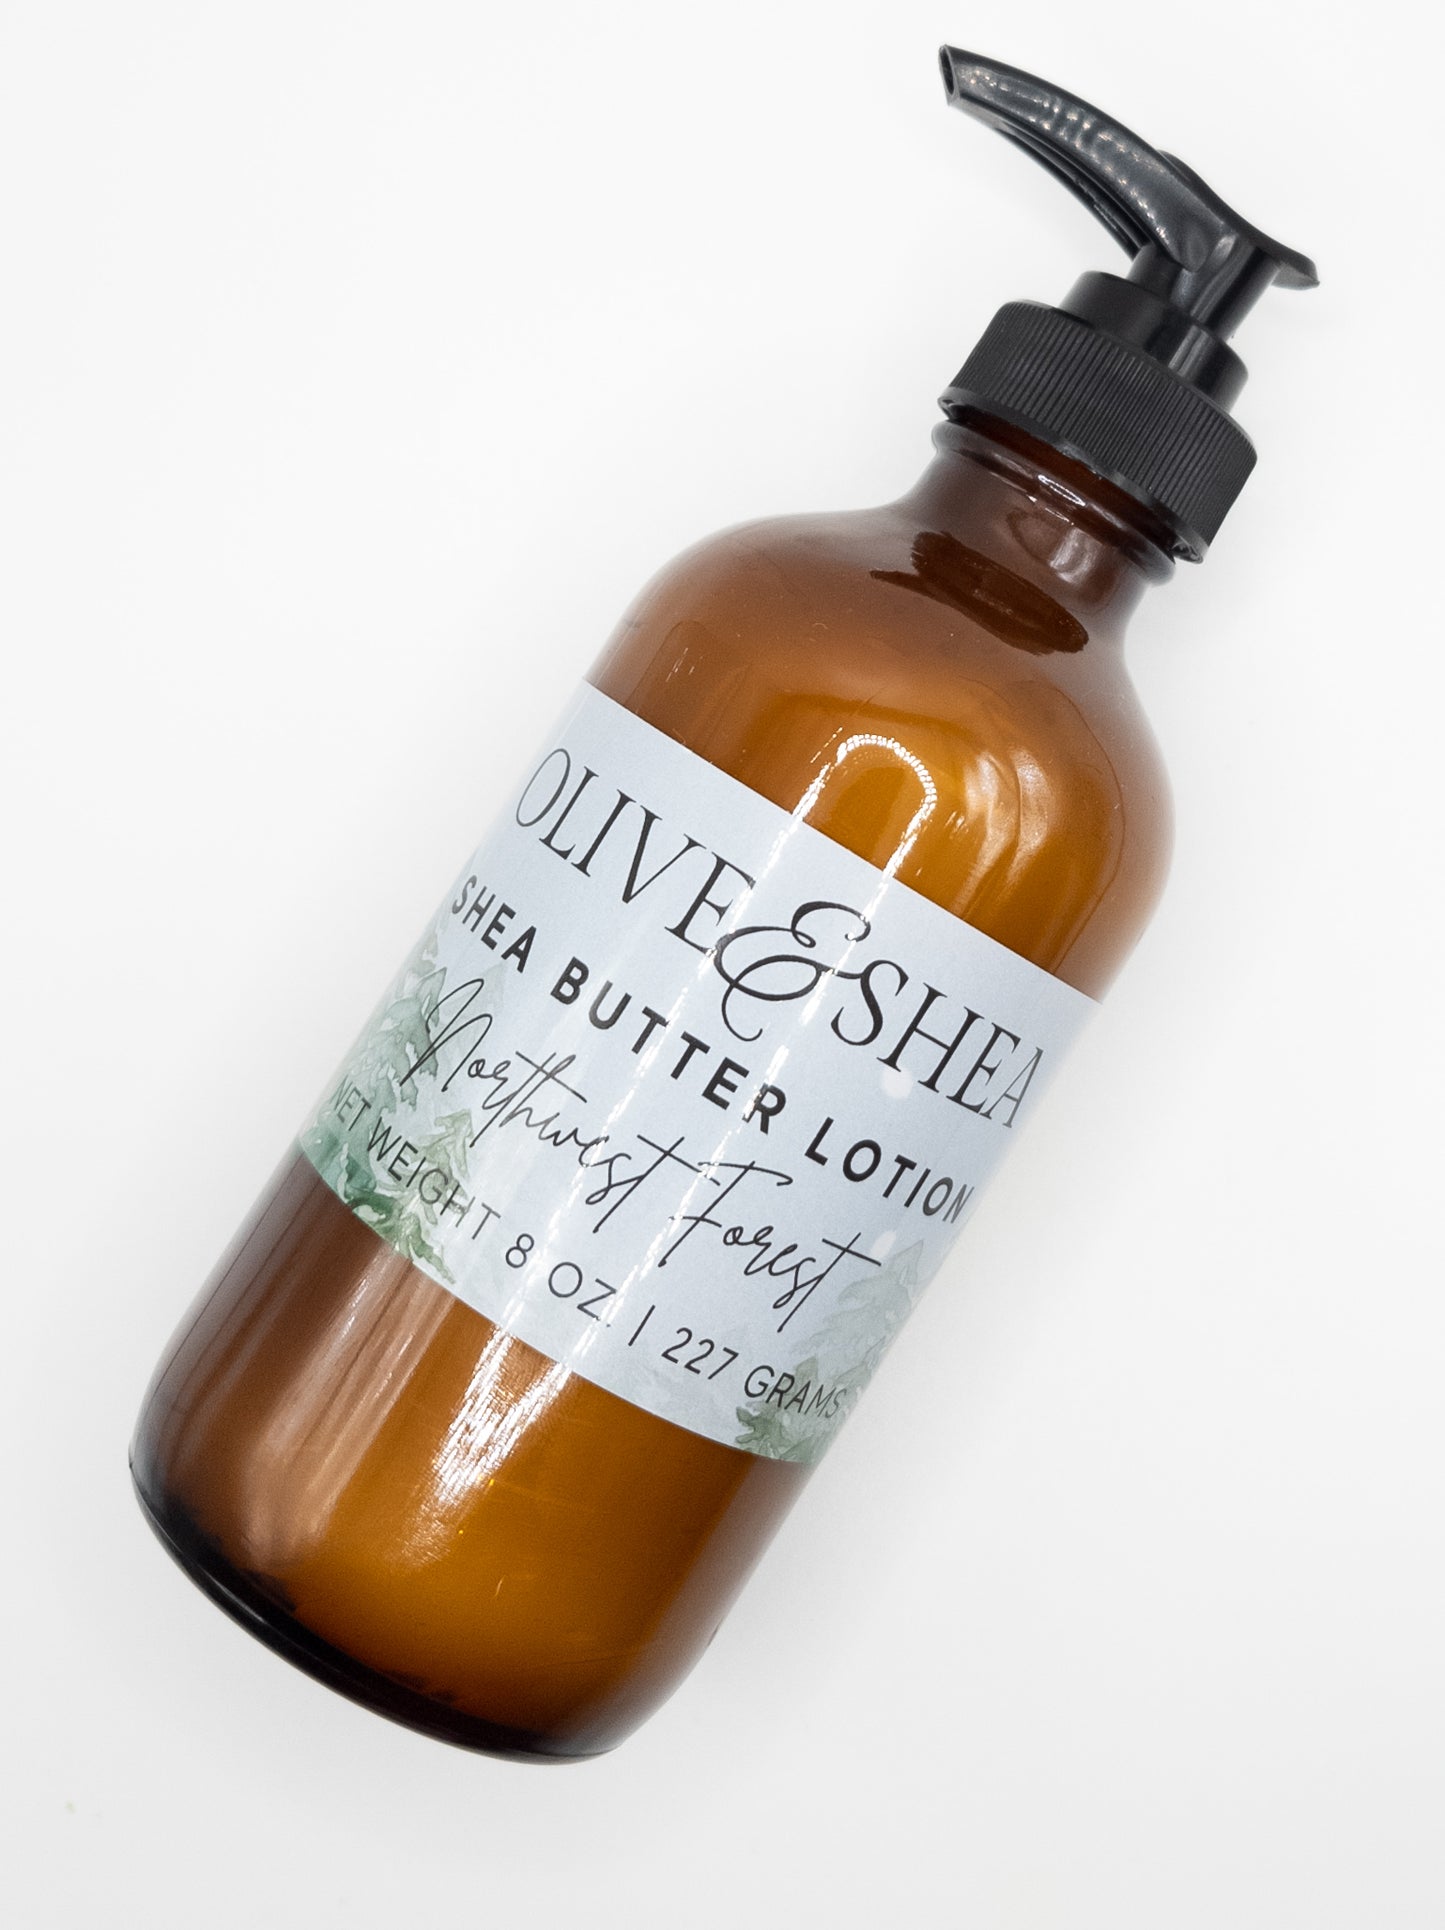 Northwest Forest Shea Butter Lotion